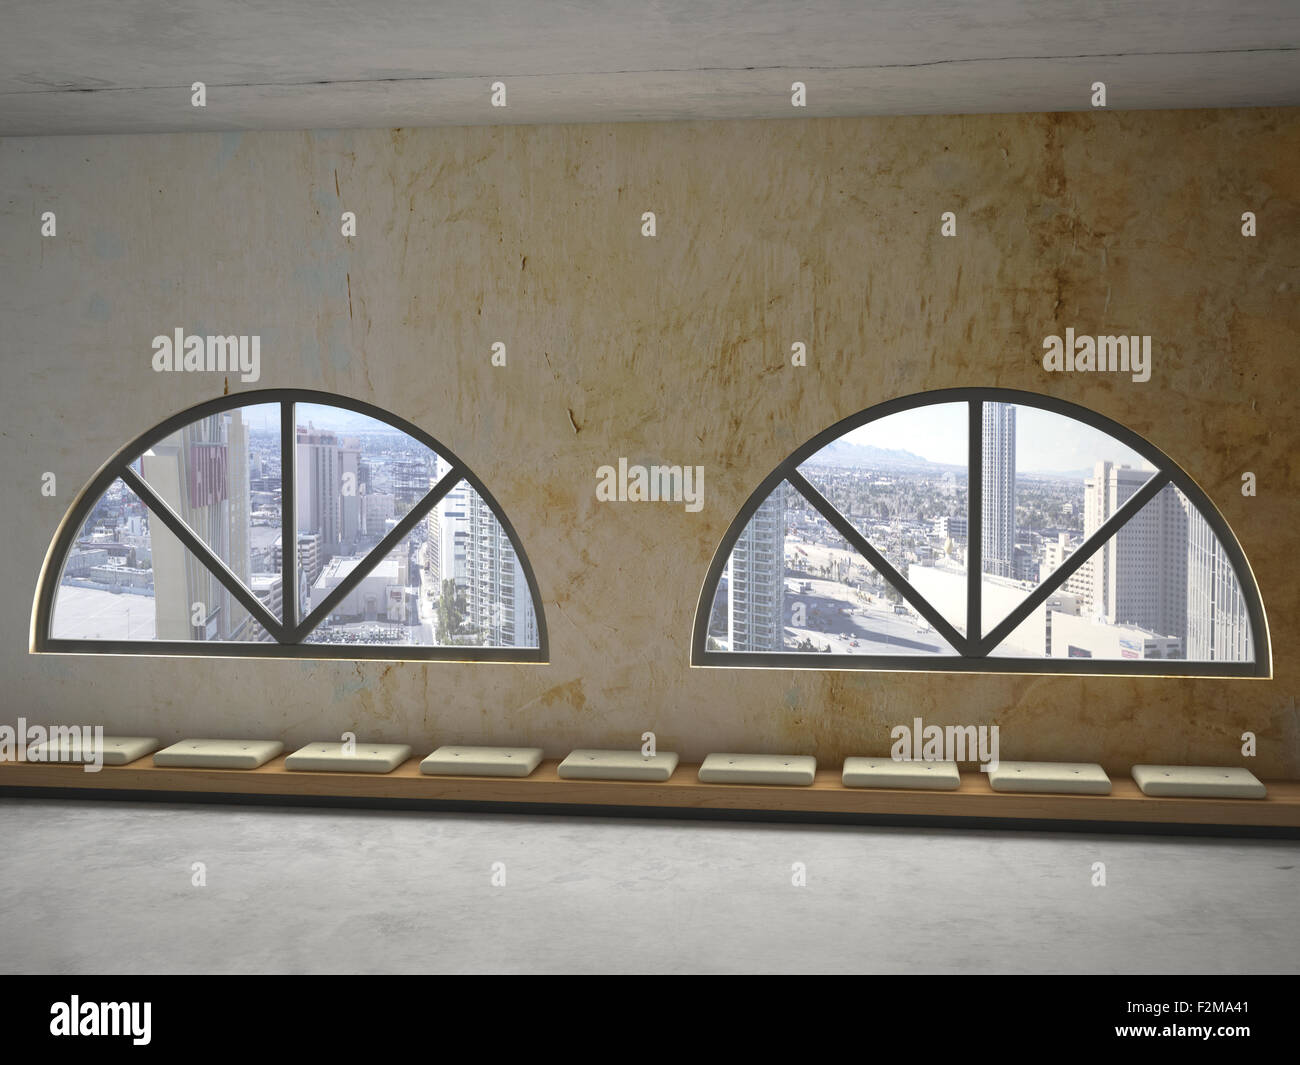 Row of cushions on wooden bench under two round arch windows, 3D Rendering Stock Photo